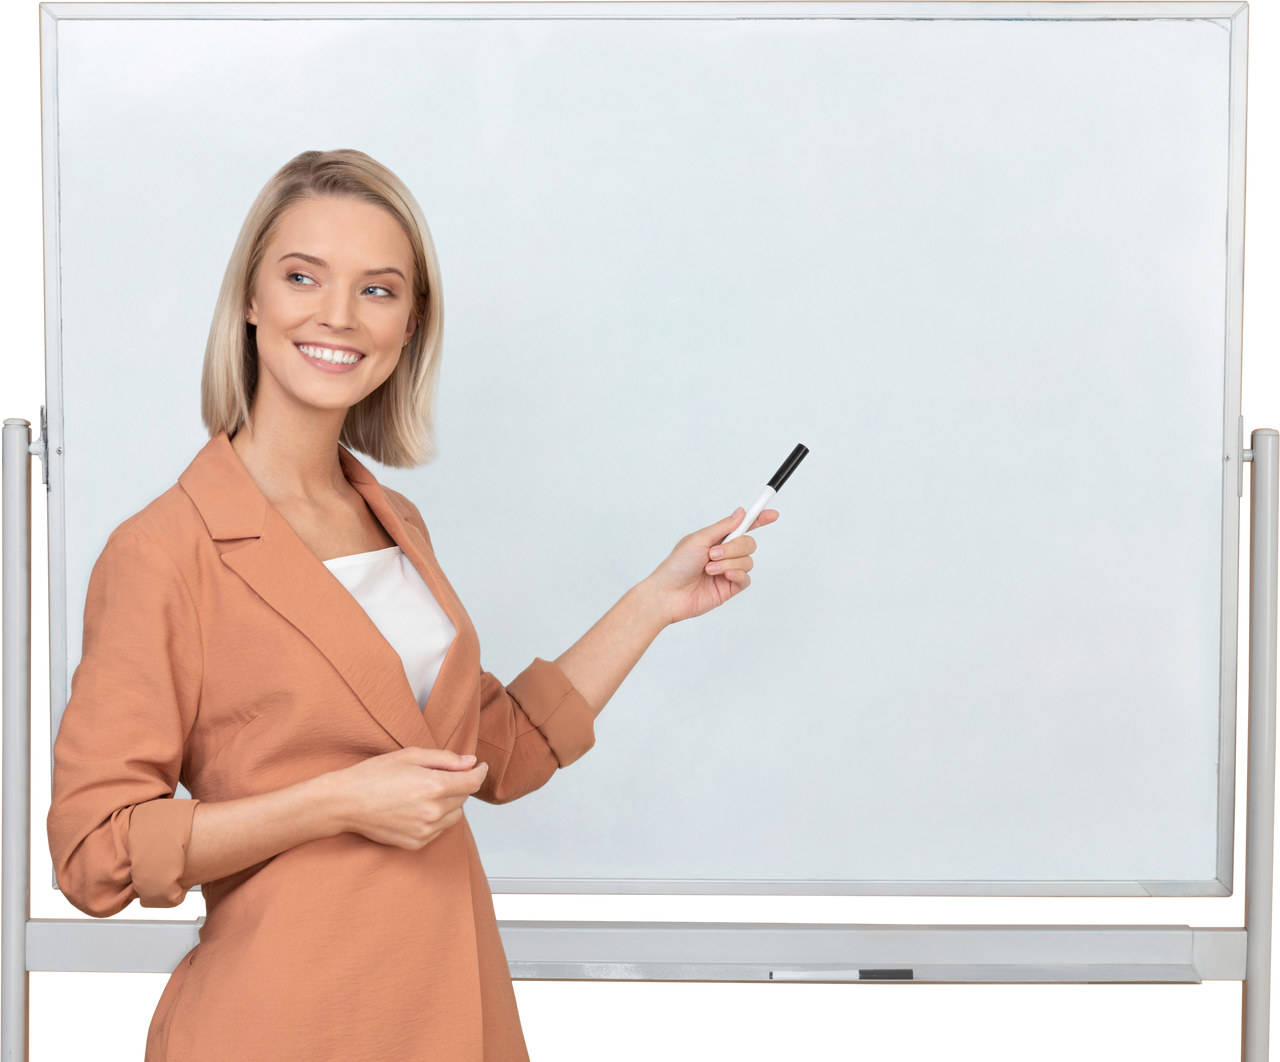 Female Teacher Gesturing to a White Board with a Marker